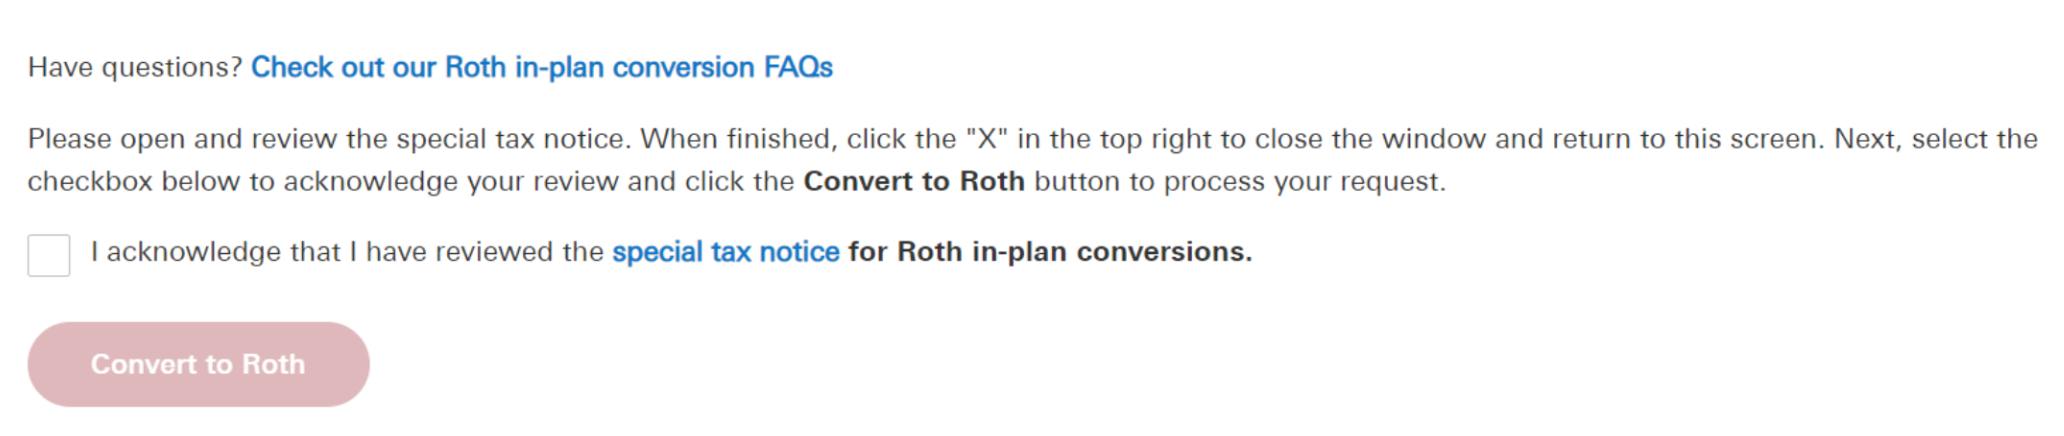 Make sure to read through both FAQs and special tax notices before conversion to Roth